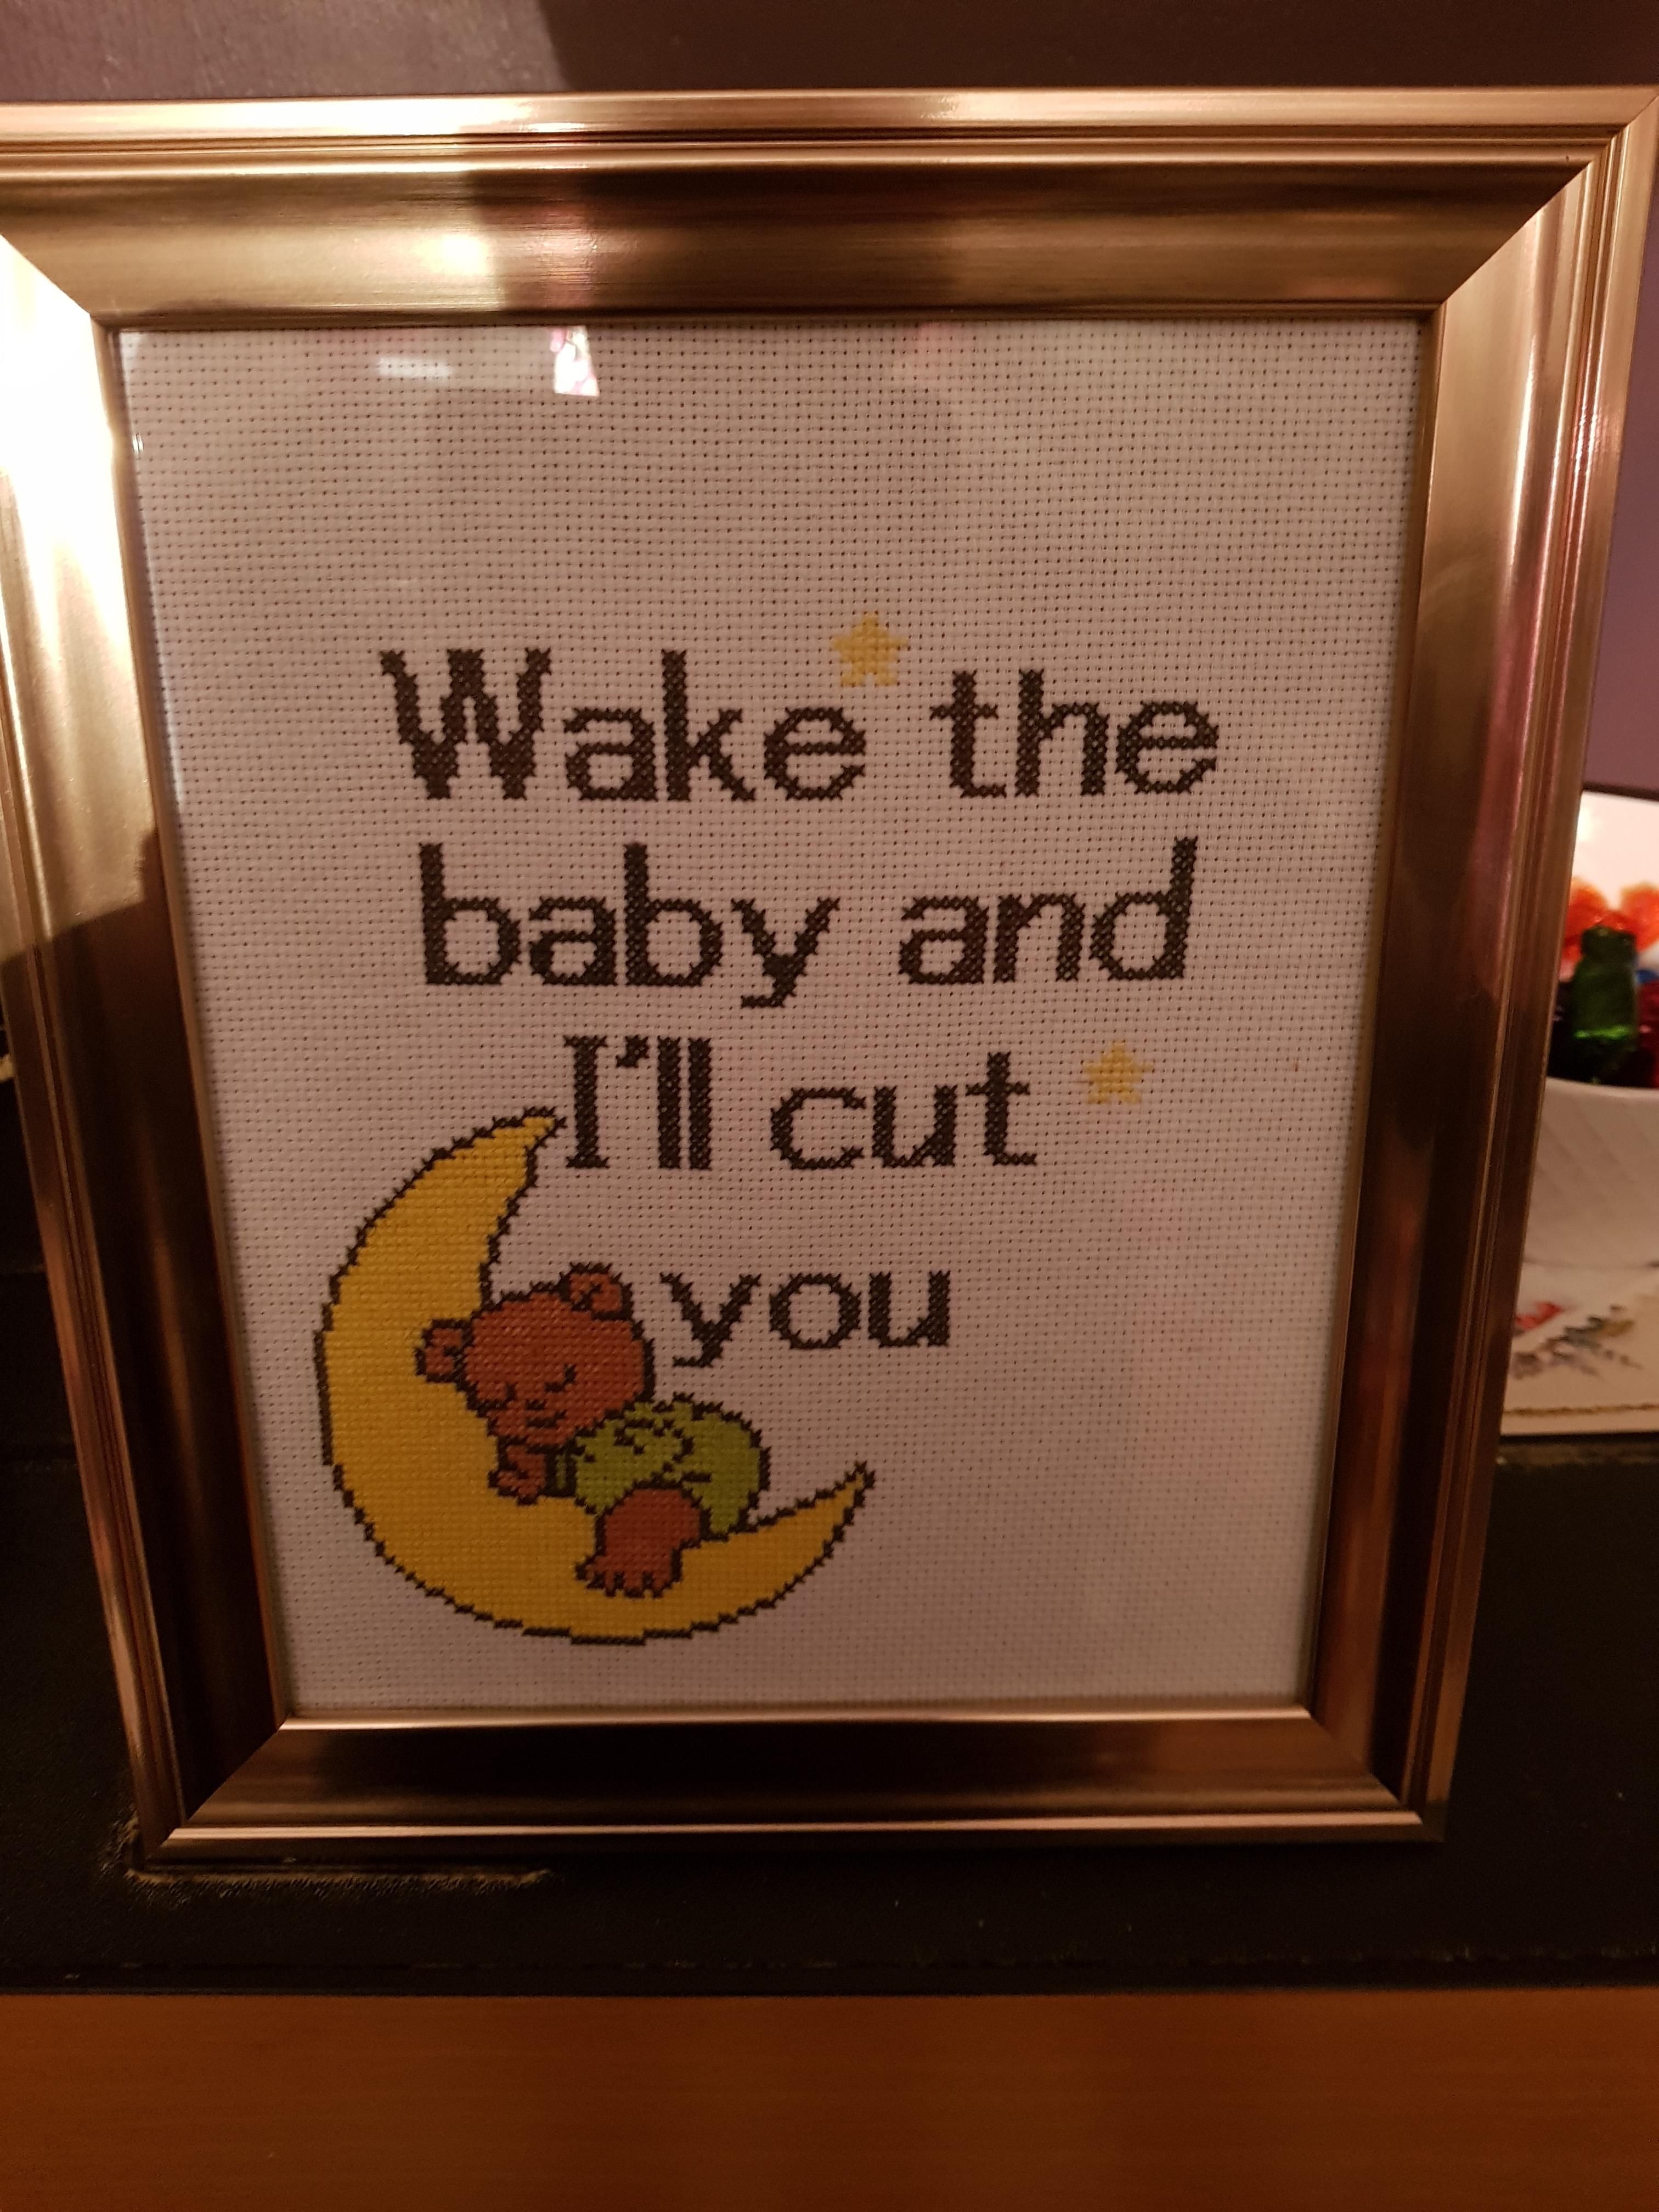 We have a 6 week old baby, our neighbours knew we were having a little trouble getting her to sleep!! They made us this great little cross stitch